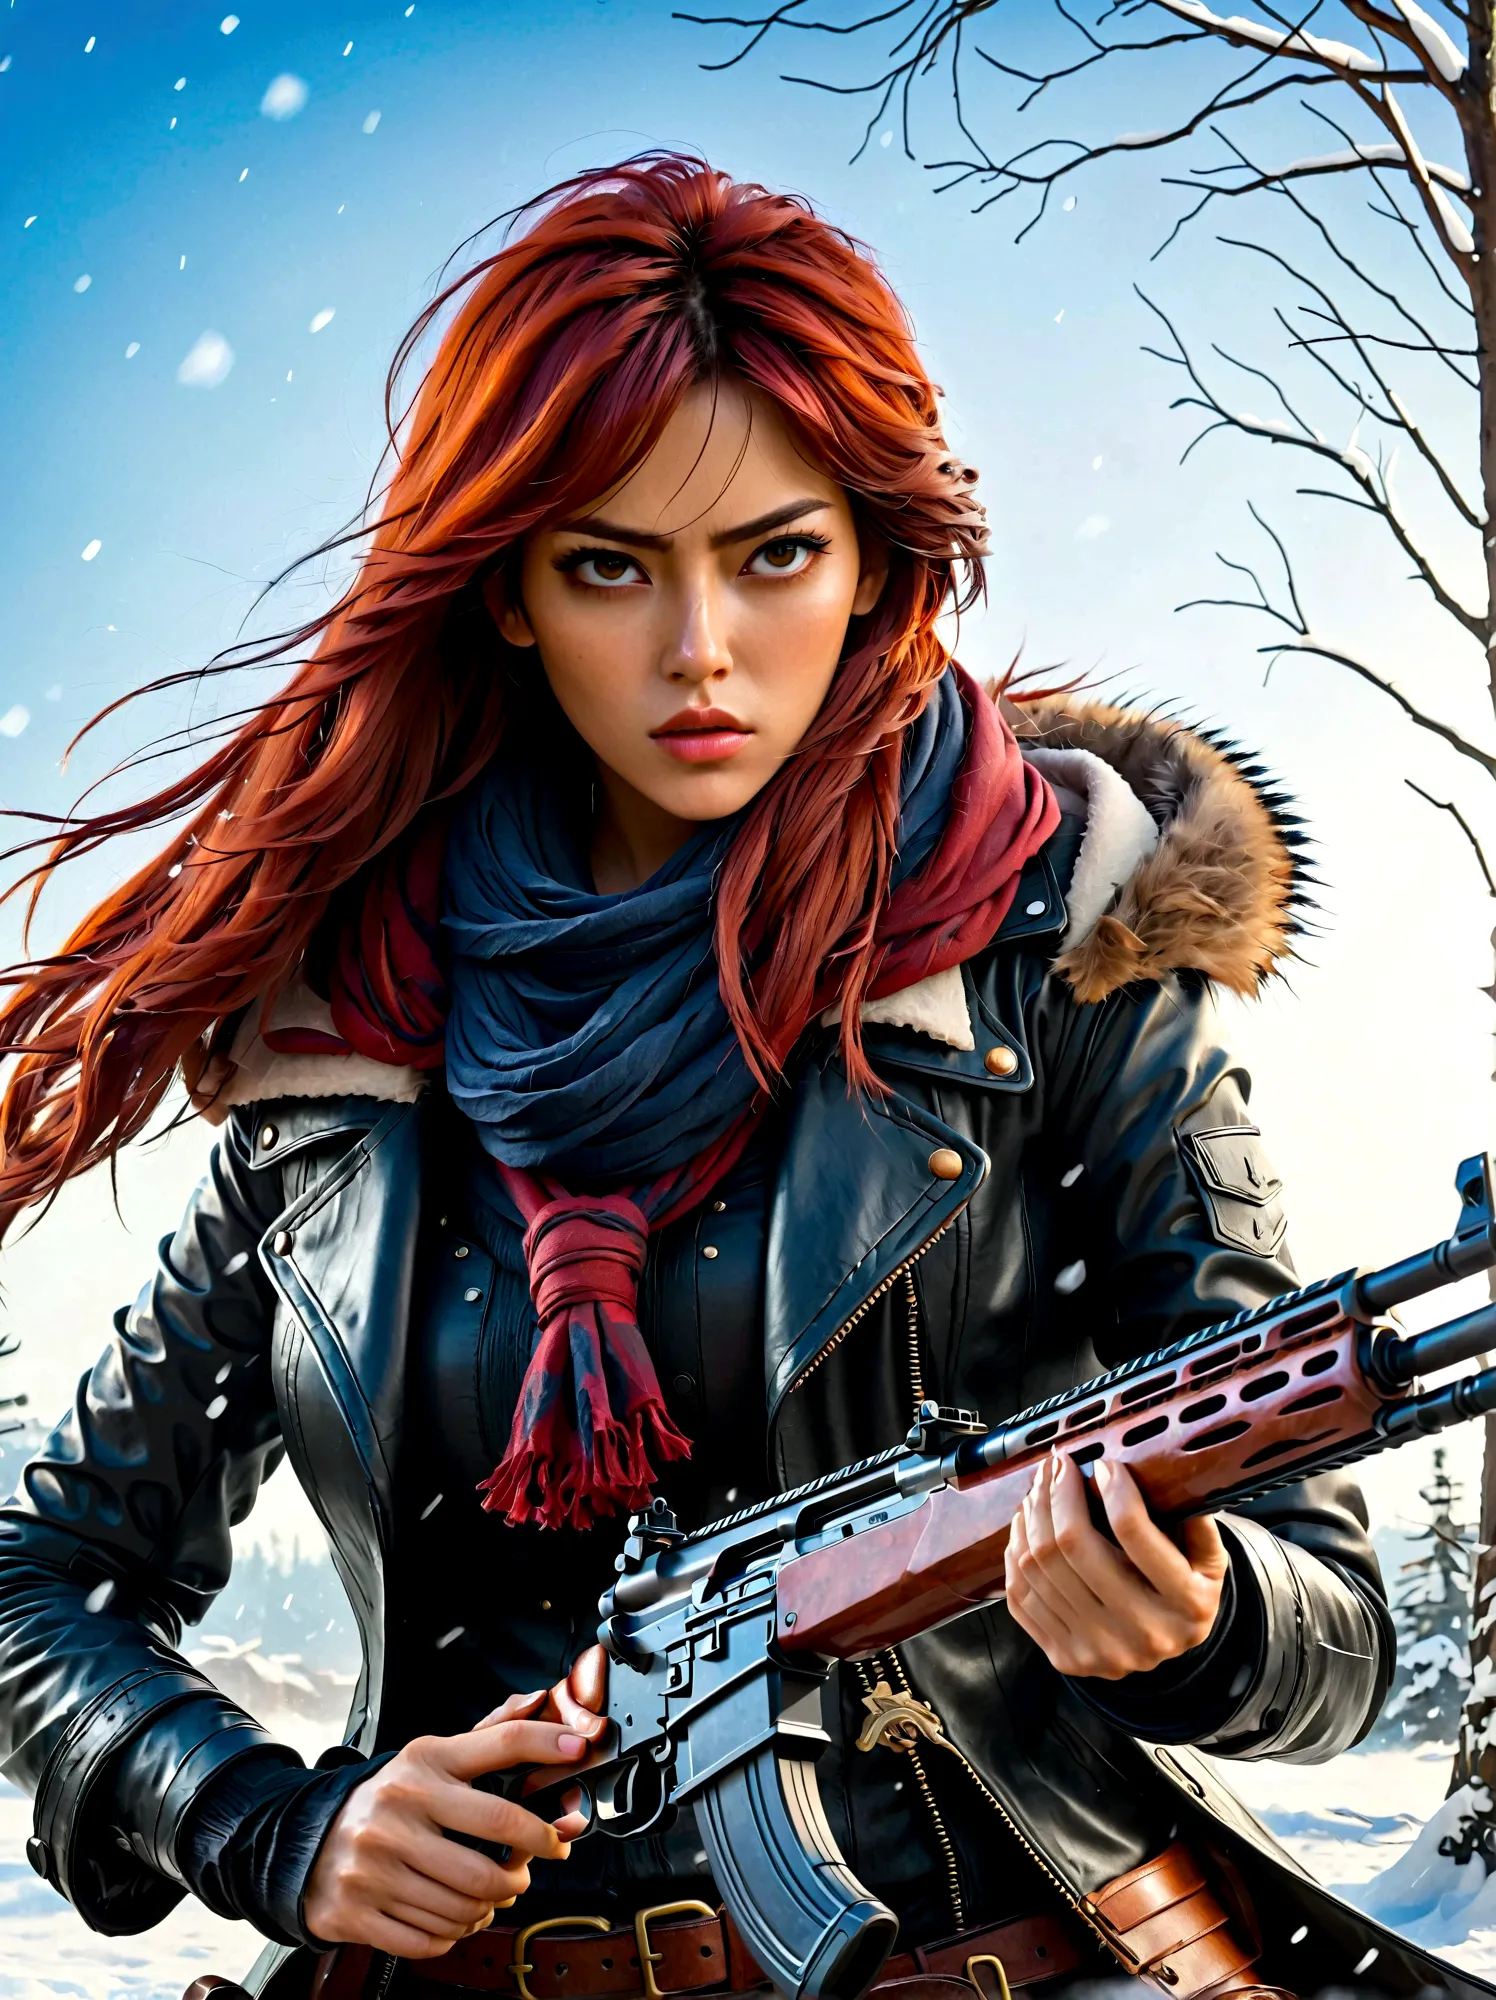 Girl holding a rifle, (Disgusted look:1.5), Snow Fighting Pose, East, Blade and Soul, Ink style, Long red hair, Leather and fur ...